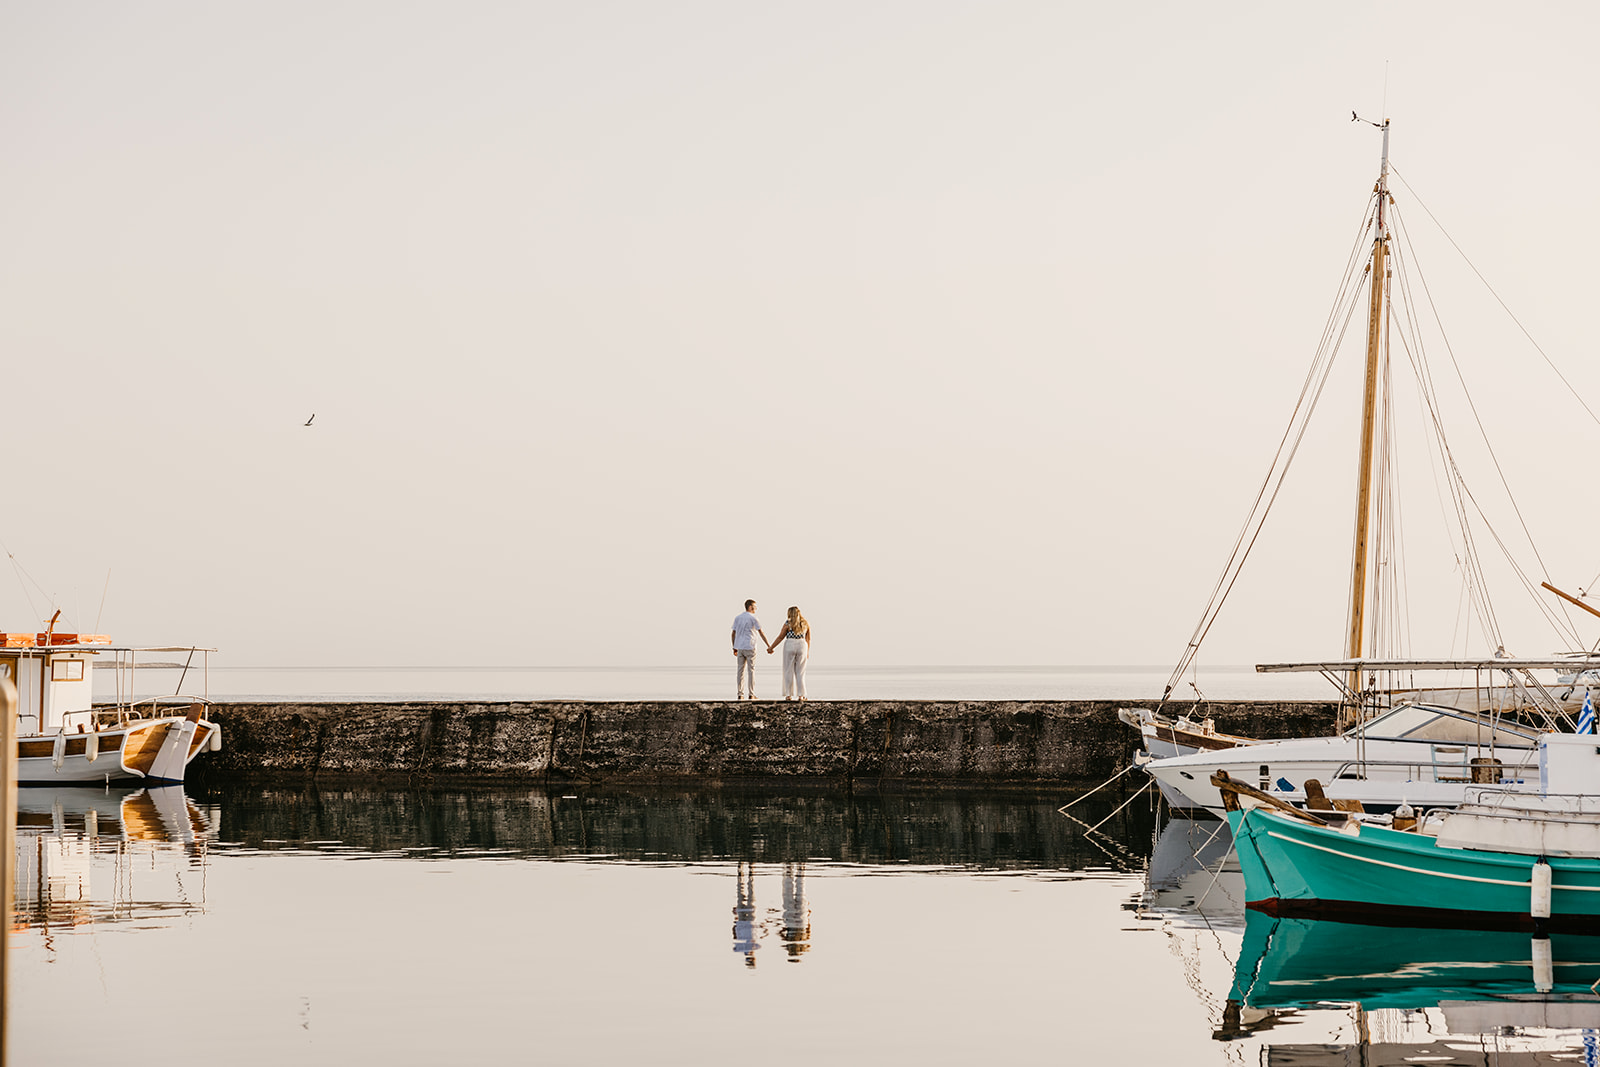 Since capturing this incredible Paros Greece Sunrise Session, I have been dying to tell you all about it! It was honestly pure magic and will probably go down in history as one of my favorite couples shoots.